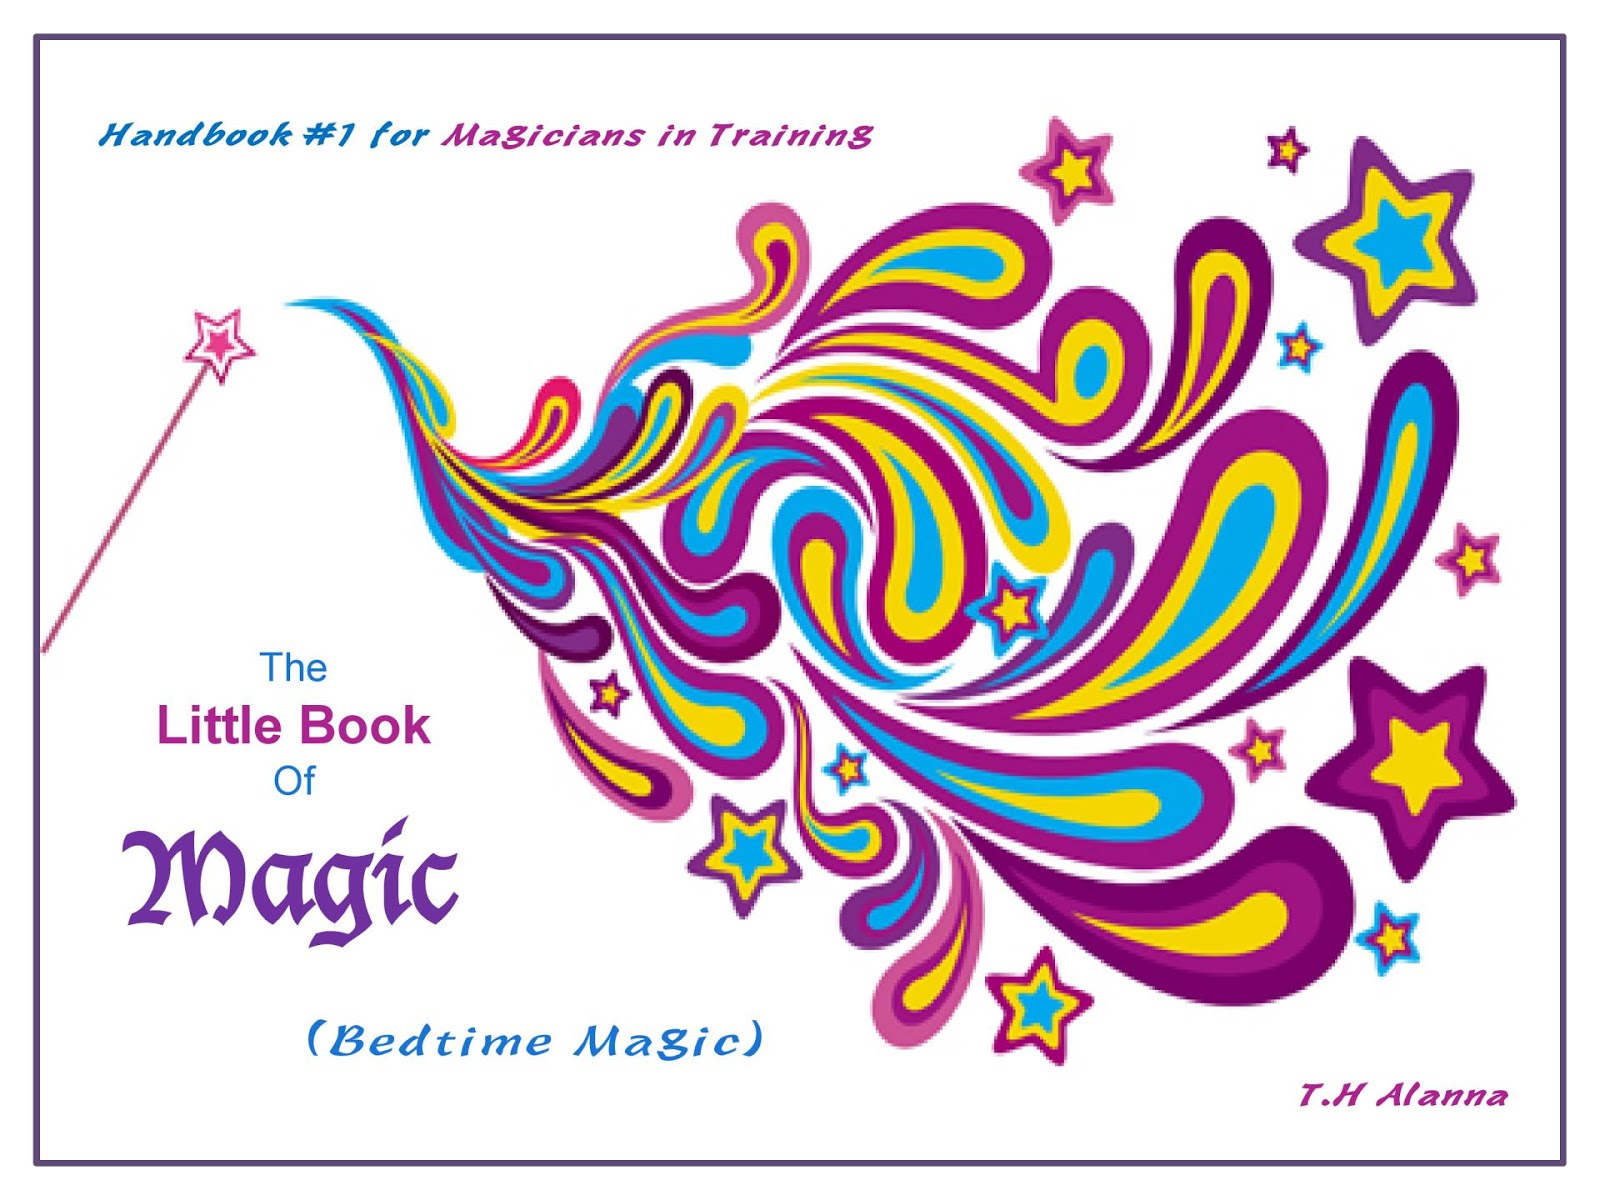 The Little Book of Magic